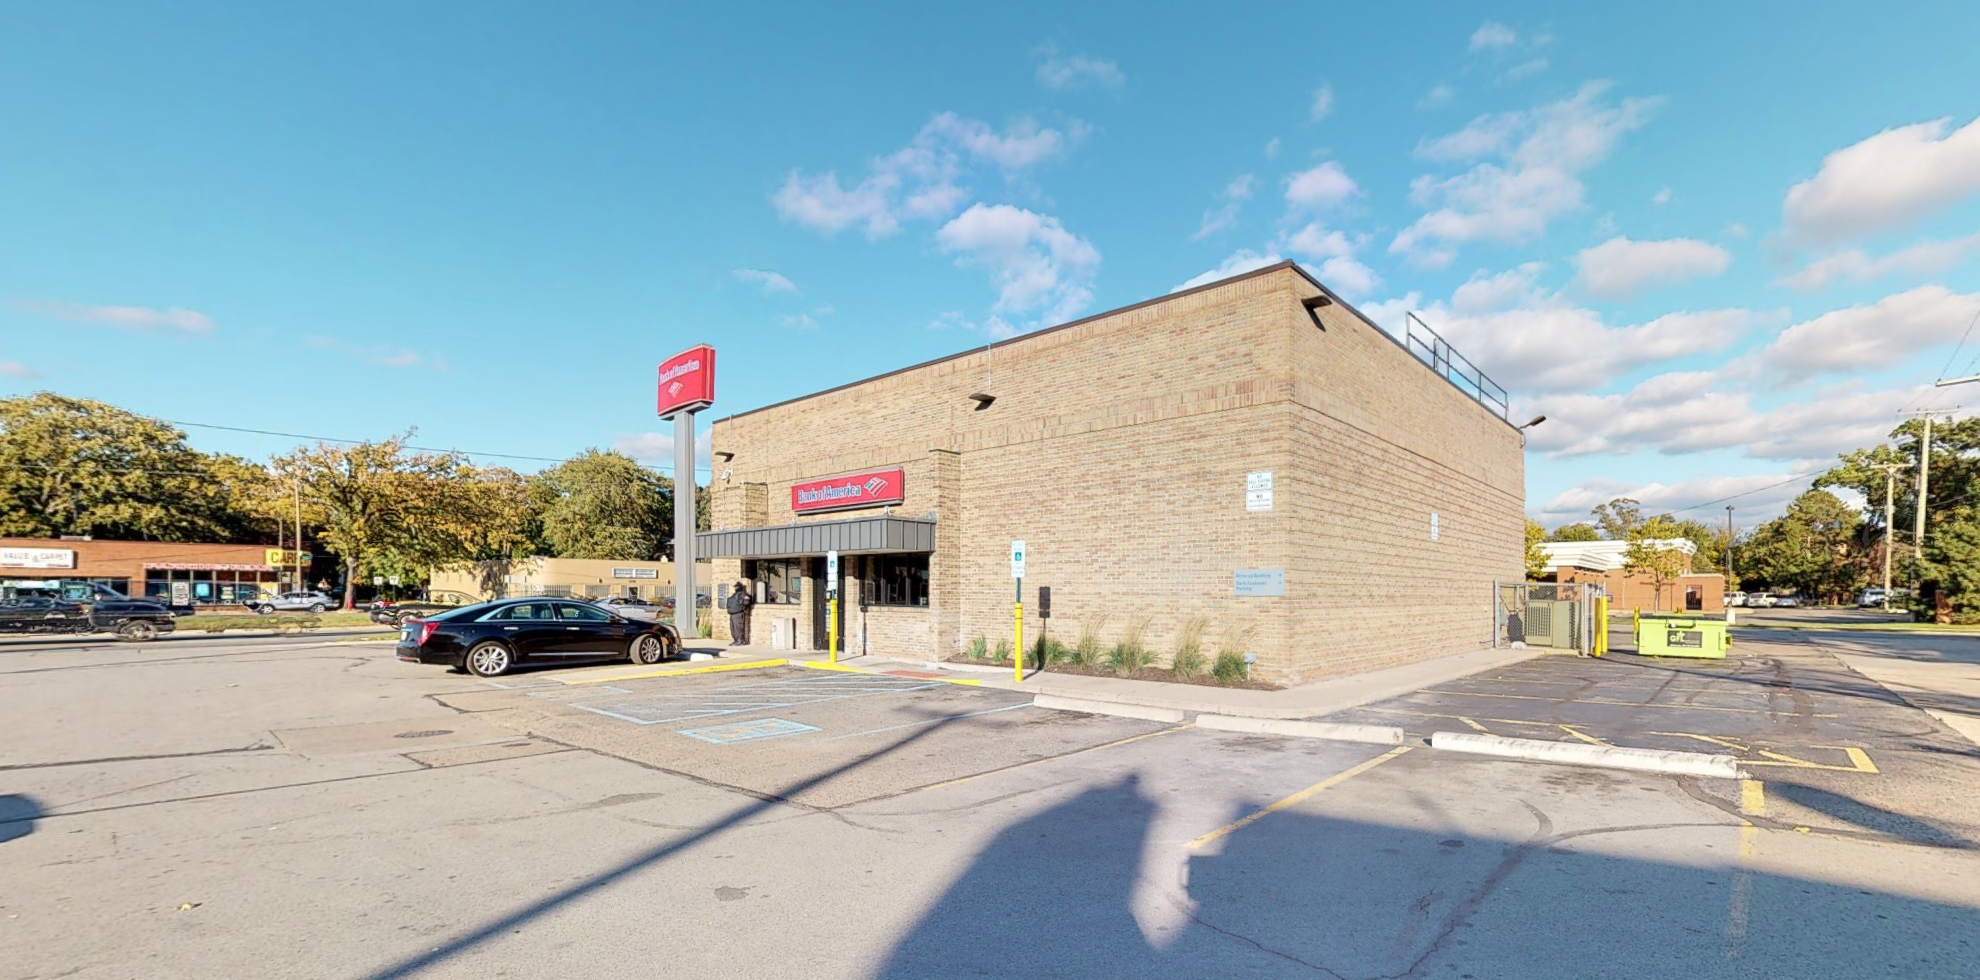 Bank of America financial center with drive-thru ATM | 4001 W 8 Mile Rd, Detroit, MI 48221